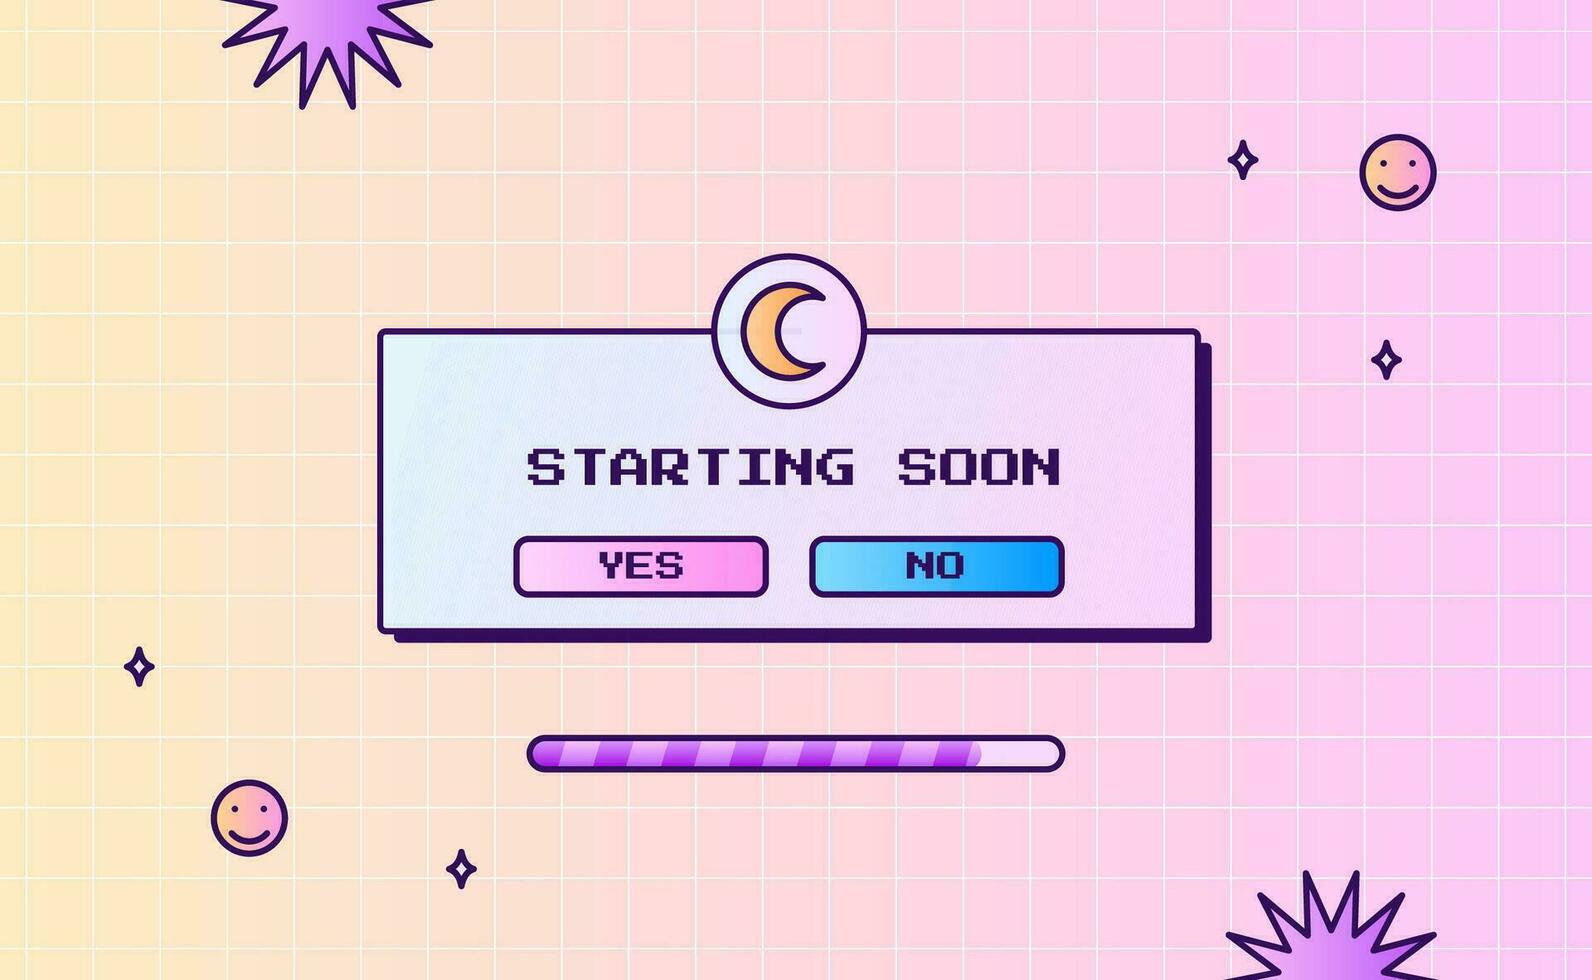 Stream starting soon offline screen ui layout modern pink purple gradient with window interface for gaming or streaming vector